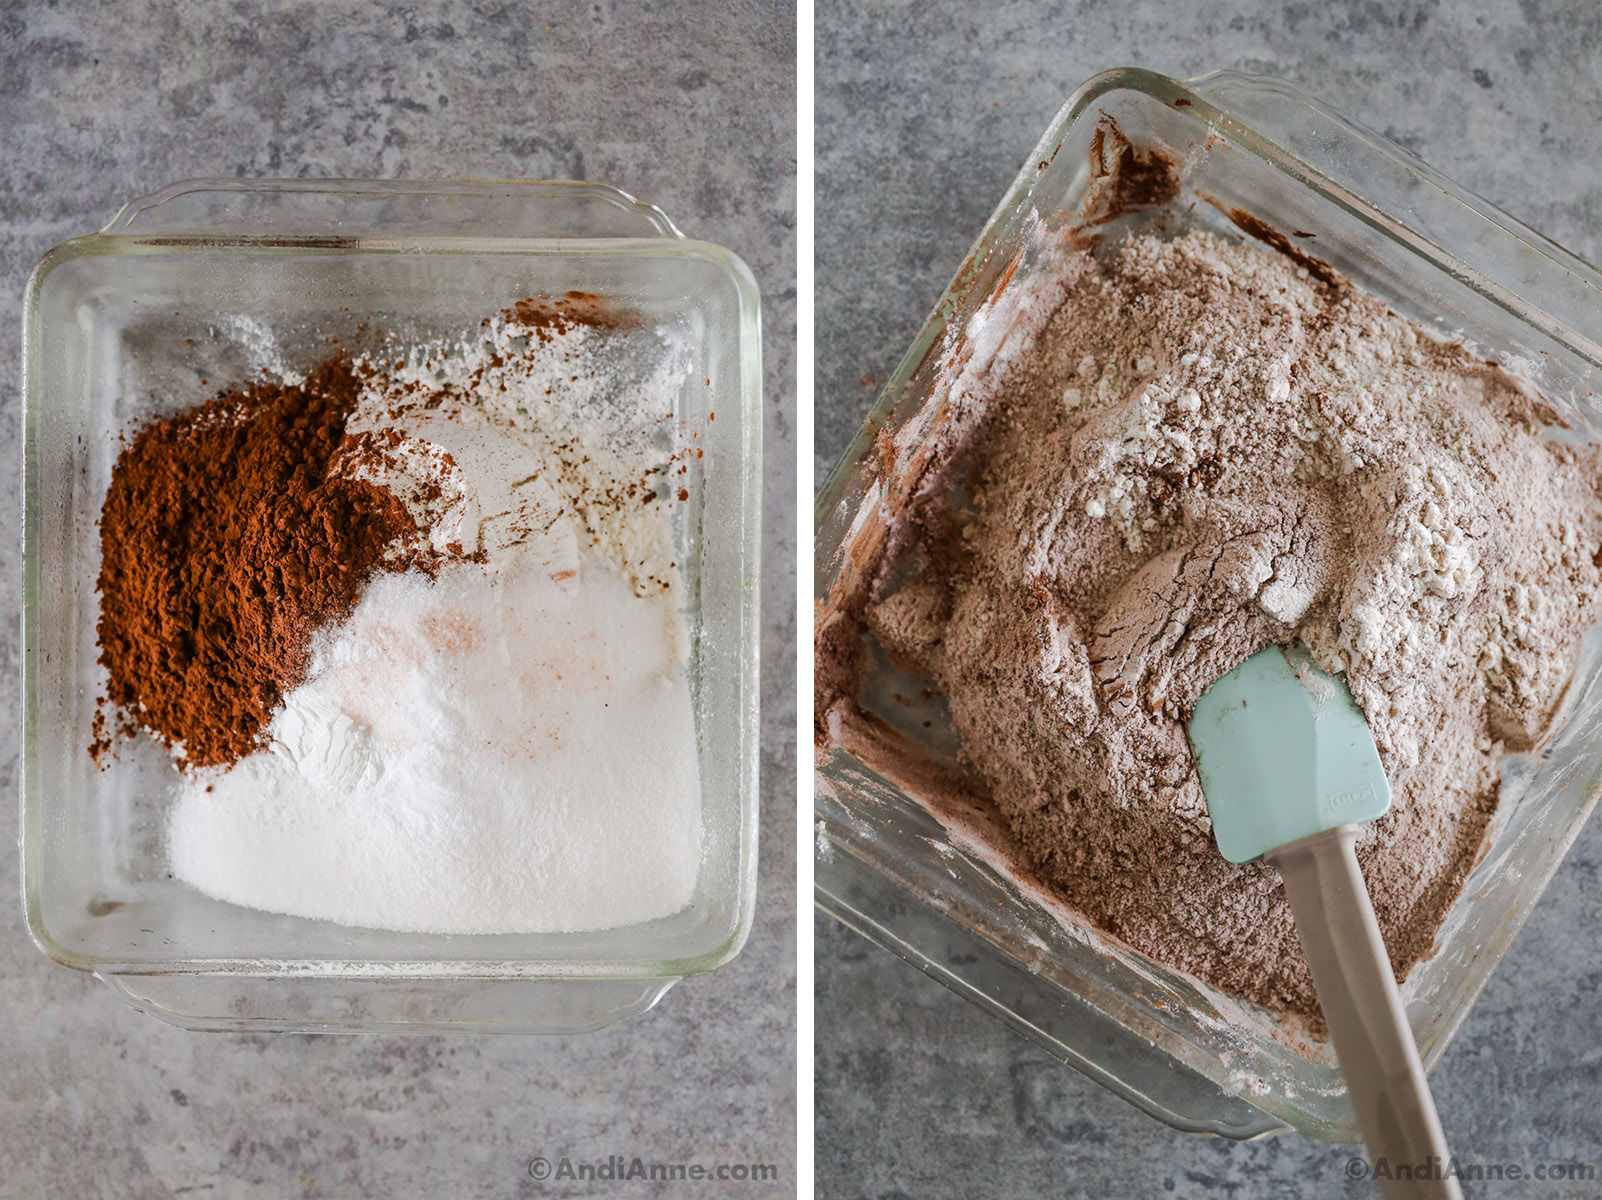 Two images of an 8x8 glass baking dish. First with flour, cocoa powder and other baking ingredients dumped in. Second with all ingredients mixed together.